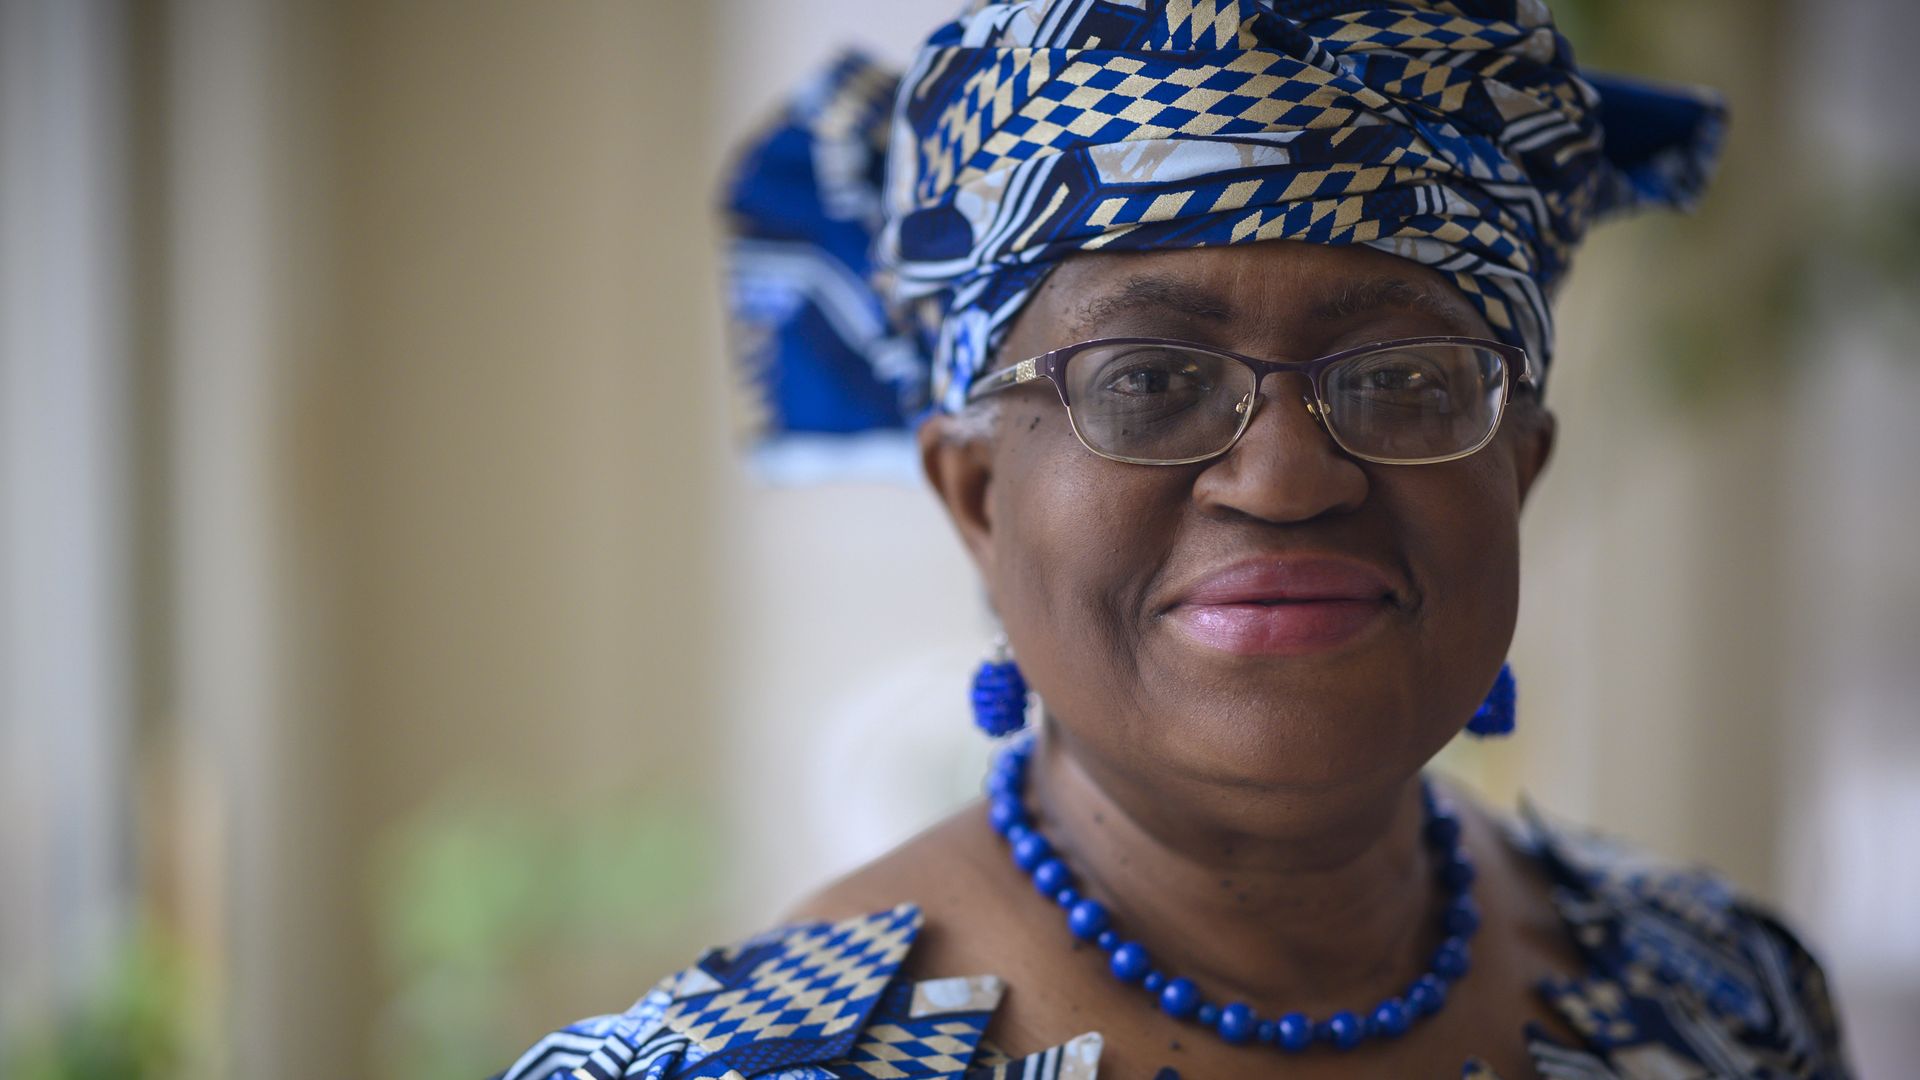 Nigeria's Ngozi Okonjo-Iweala poses in Potomac, Maryland minutes before she is confirmed Monday as the first woman and first African leader of the beleaguered World Trade Organization